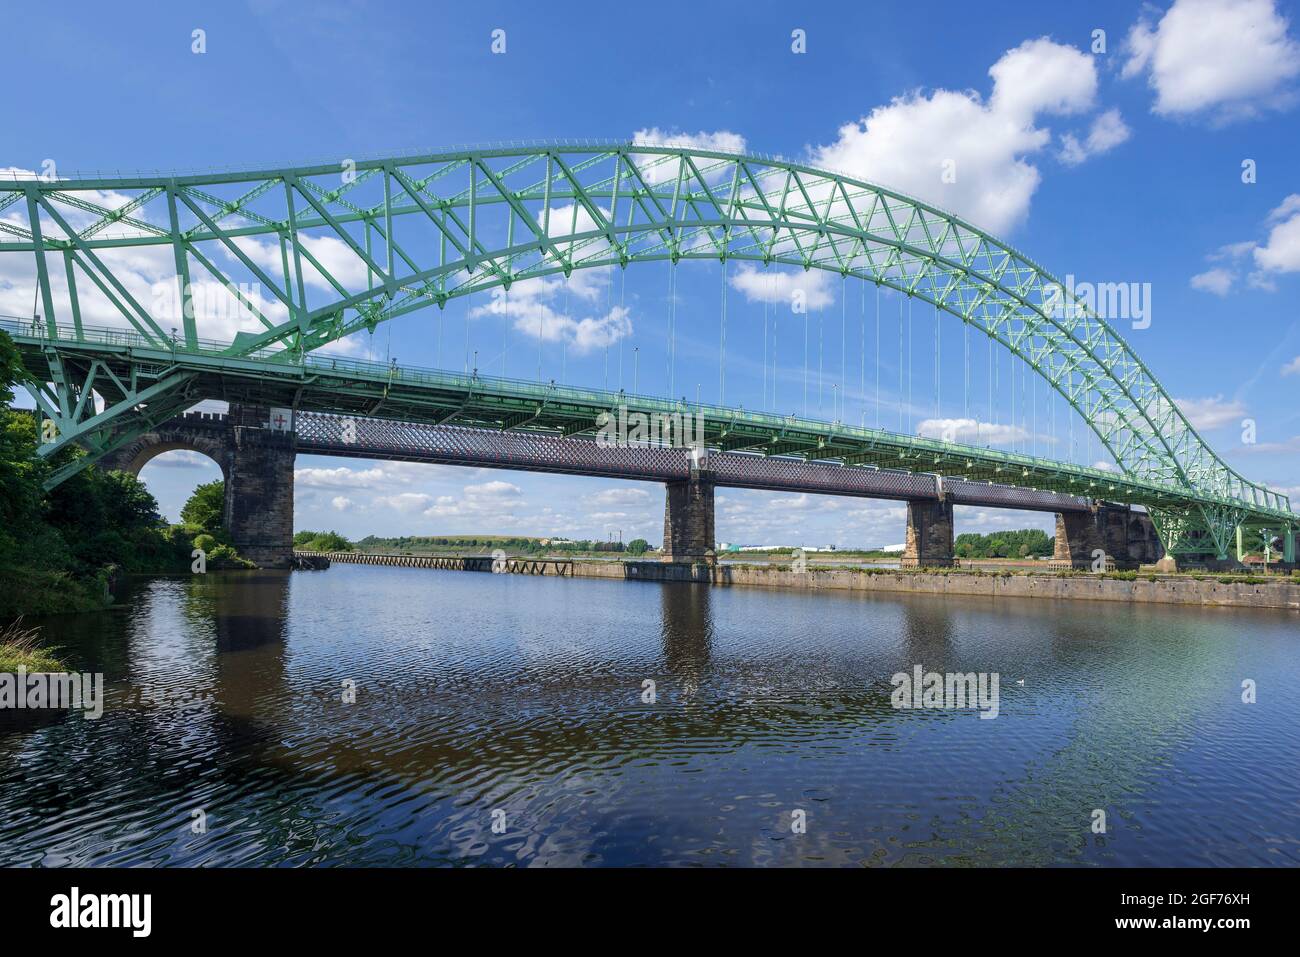 The Silver Jubilee or Queensway bridge crosses the River Mersey at Runcorn Gap between Runcorn and Widnes in Cheshire, England. It is alongside the Ru Stock Photo